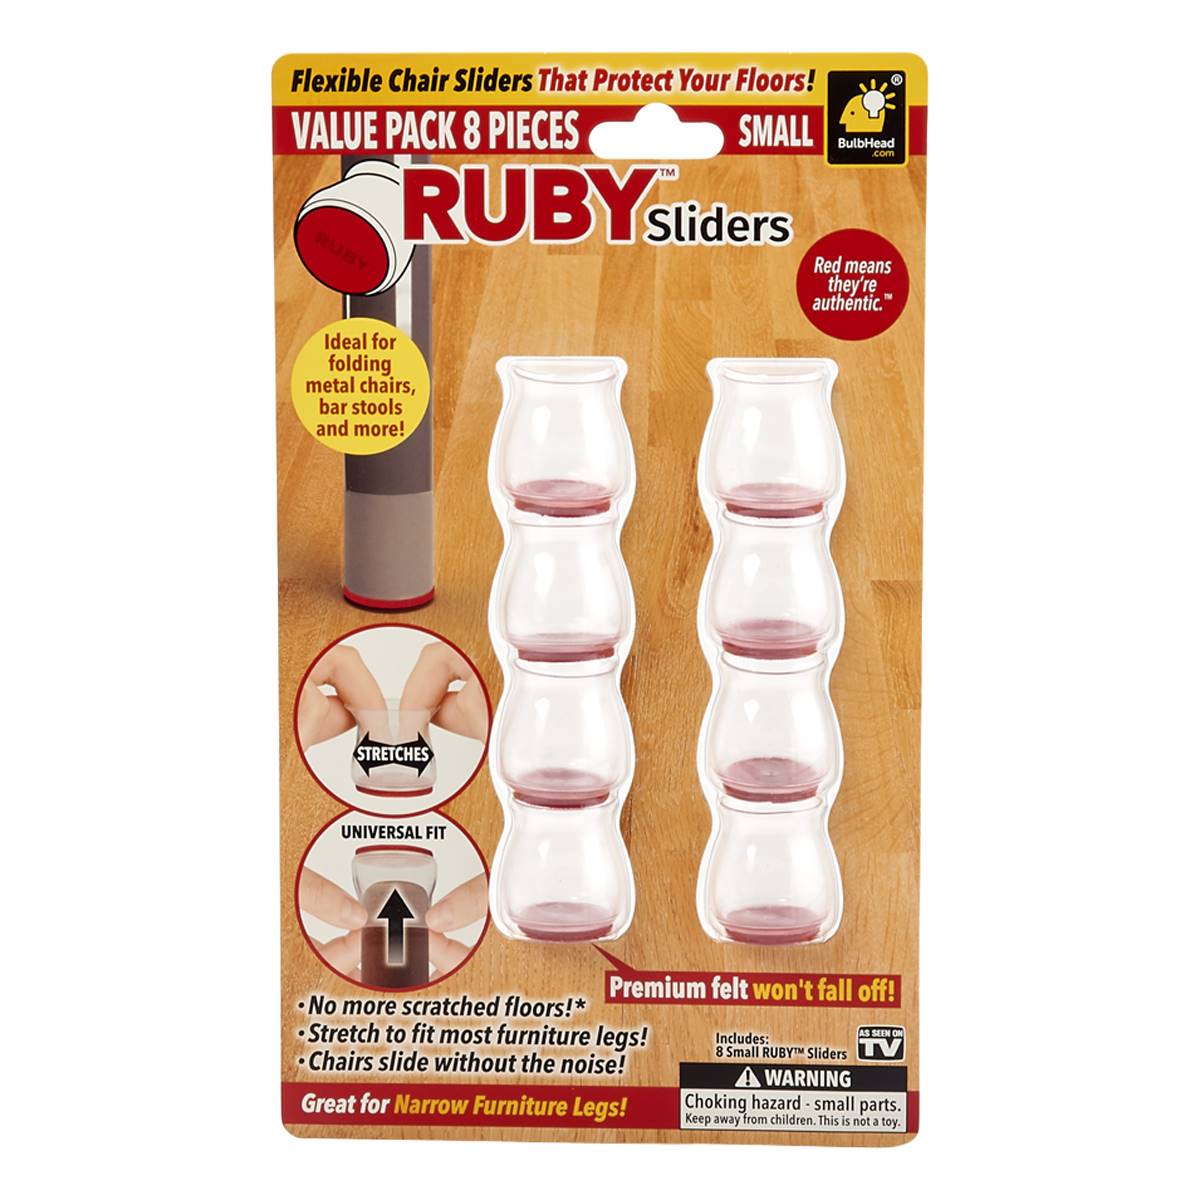 As Seen On TV Ruby Sliders Small Flexible Chair Sliders